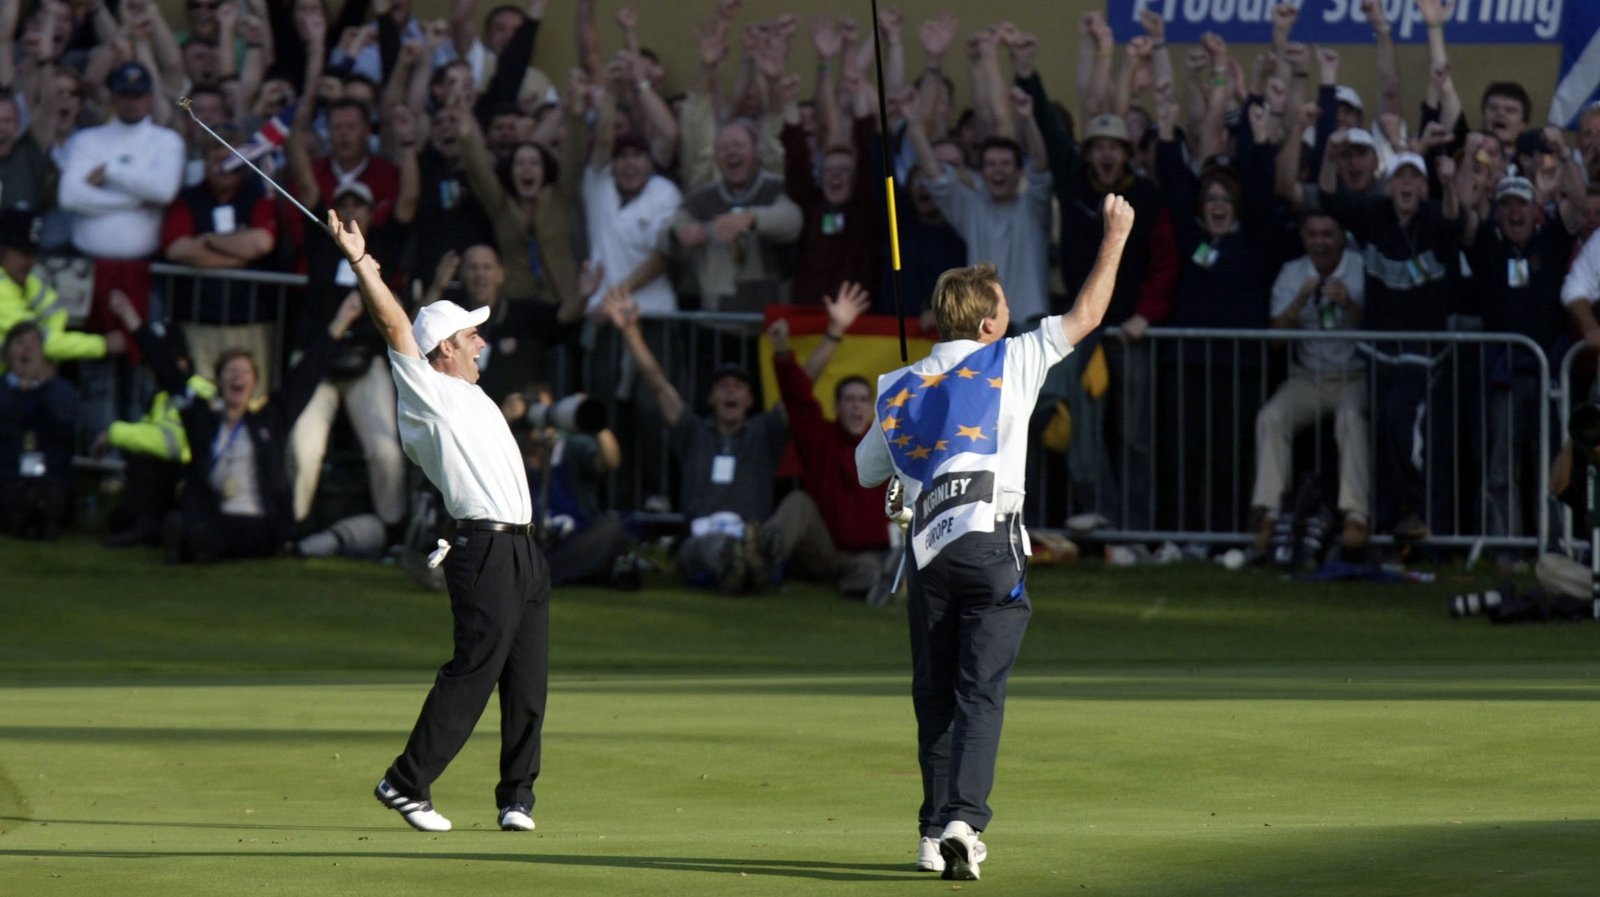 Image - Paul McGinley after nailing a putt on 18 to seal the 2002 Ryder Cup for Europe